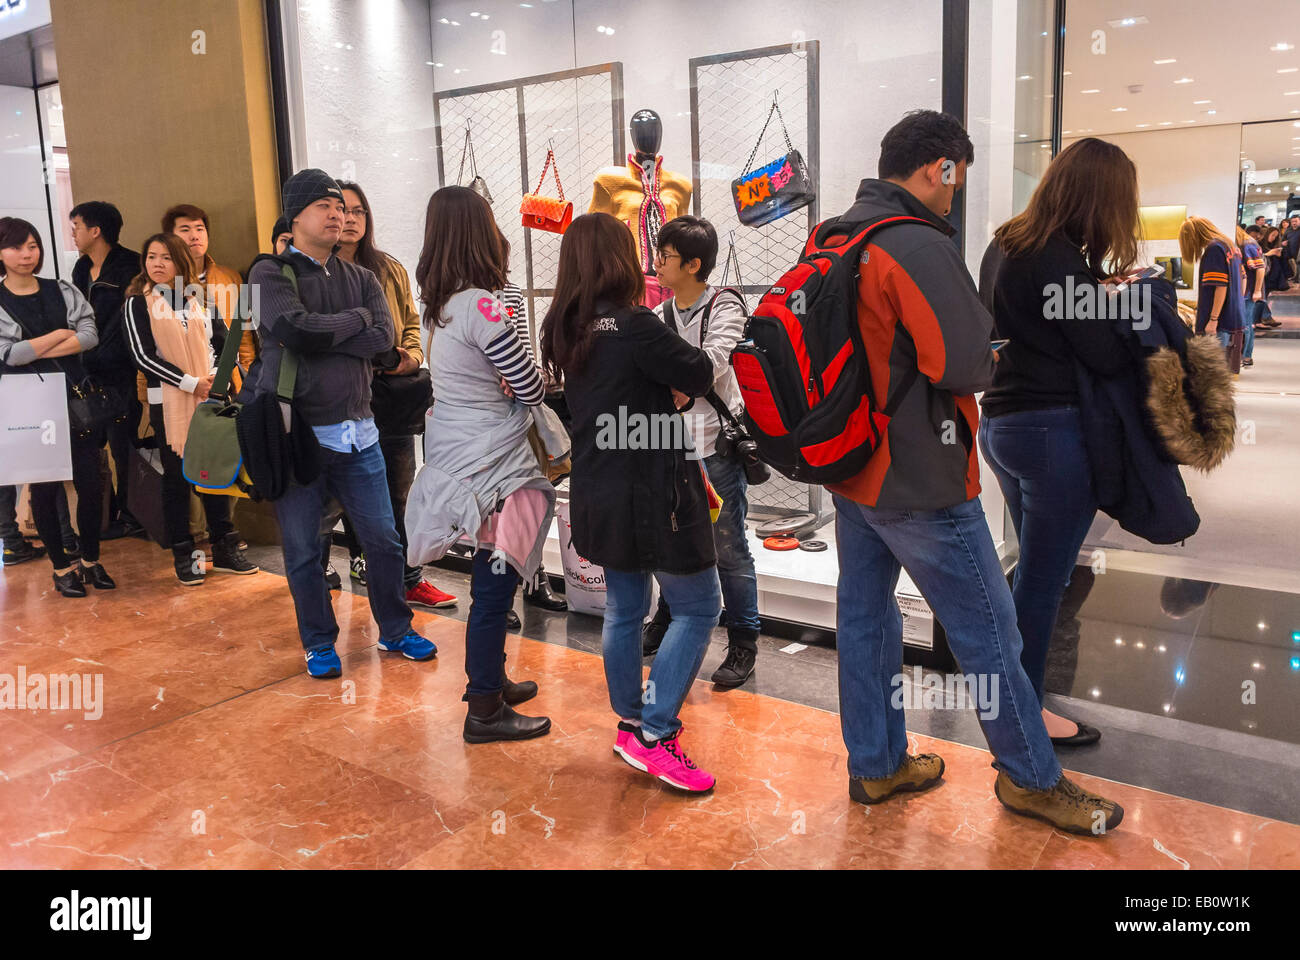 Paris, France, Chinese Tourists Shopping Queuing, lining up, inside French busy, Department Store, 'Galeries Lafayette', 'Louis Vuitton' Luxury Brand Shop haute couture interior, Prestige consumer shoppers Stock Photo